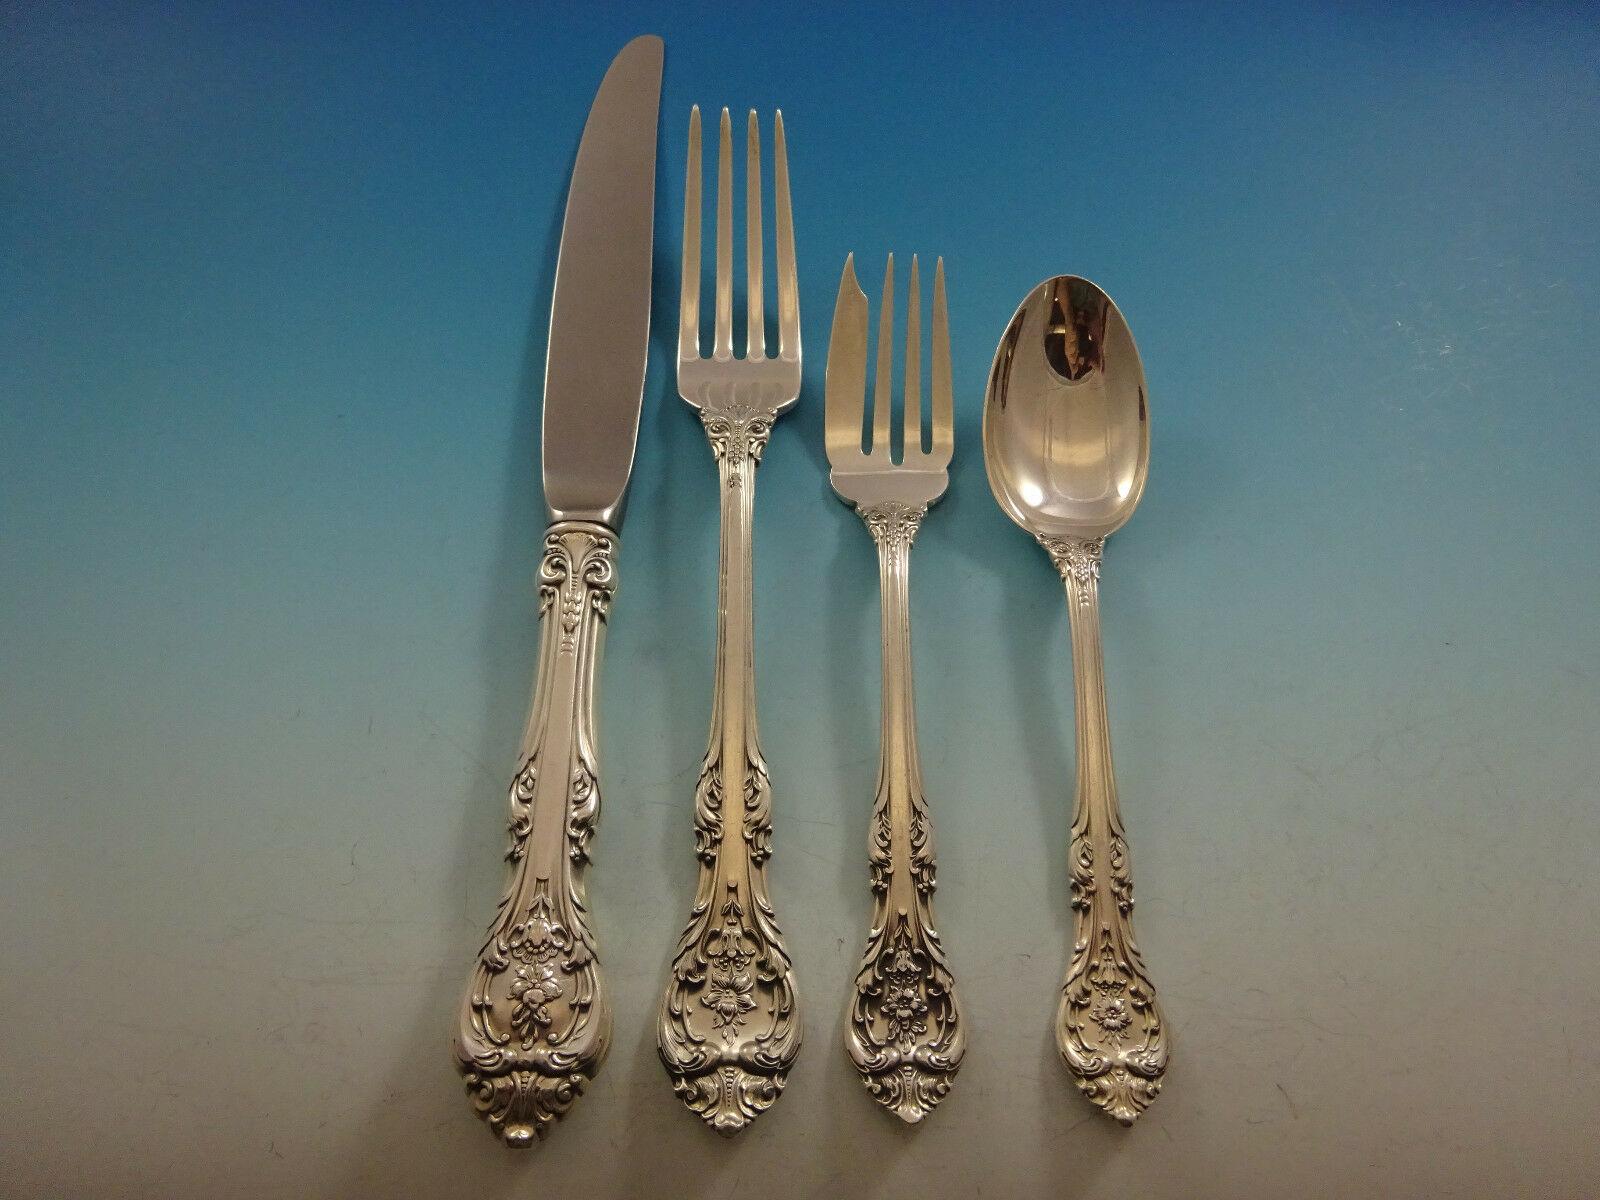 King Edward by Gorham sterling silver dinner size flatware set - 67 pieces. This set includes:

12 dinner size knives, 9 3/4